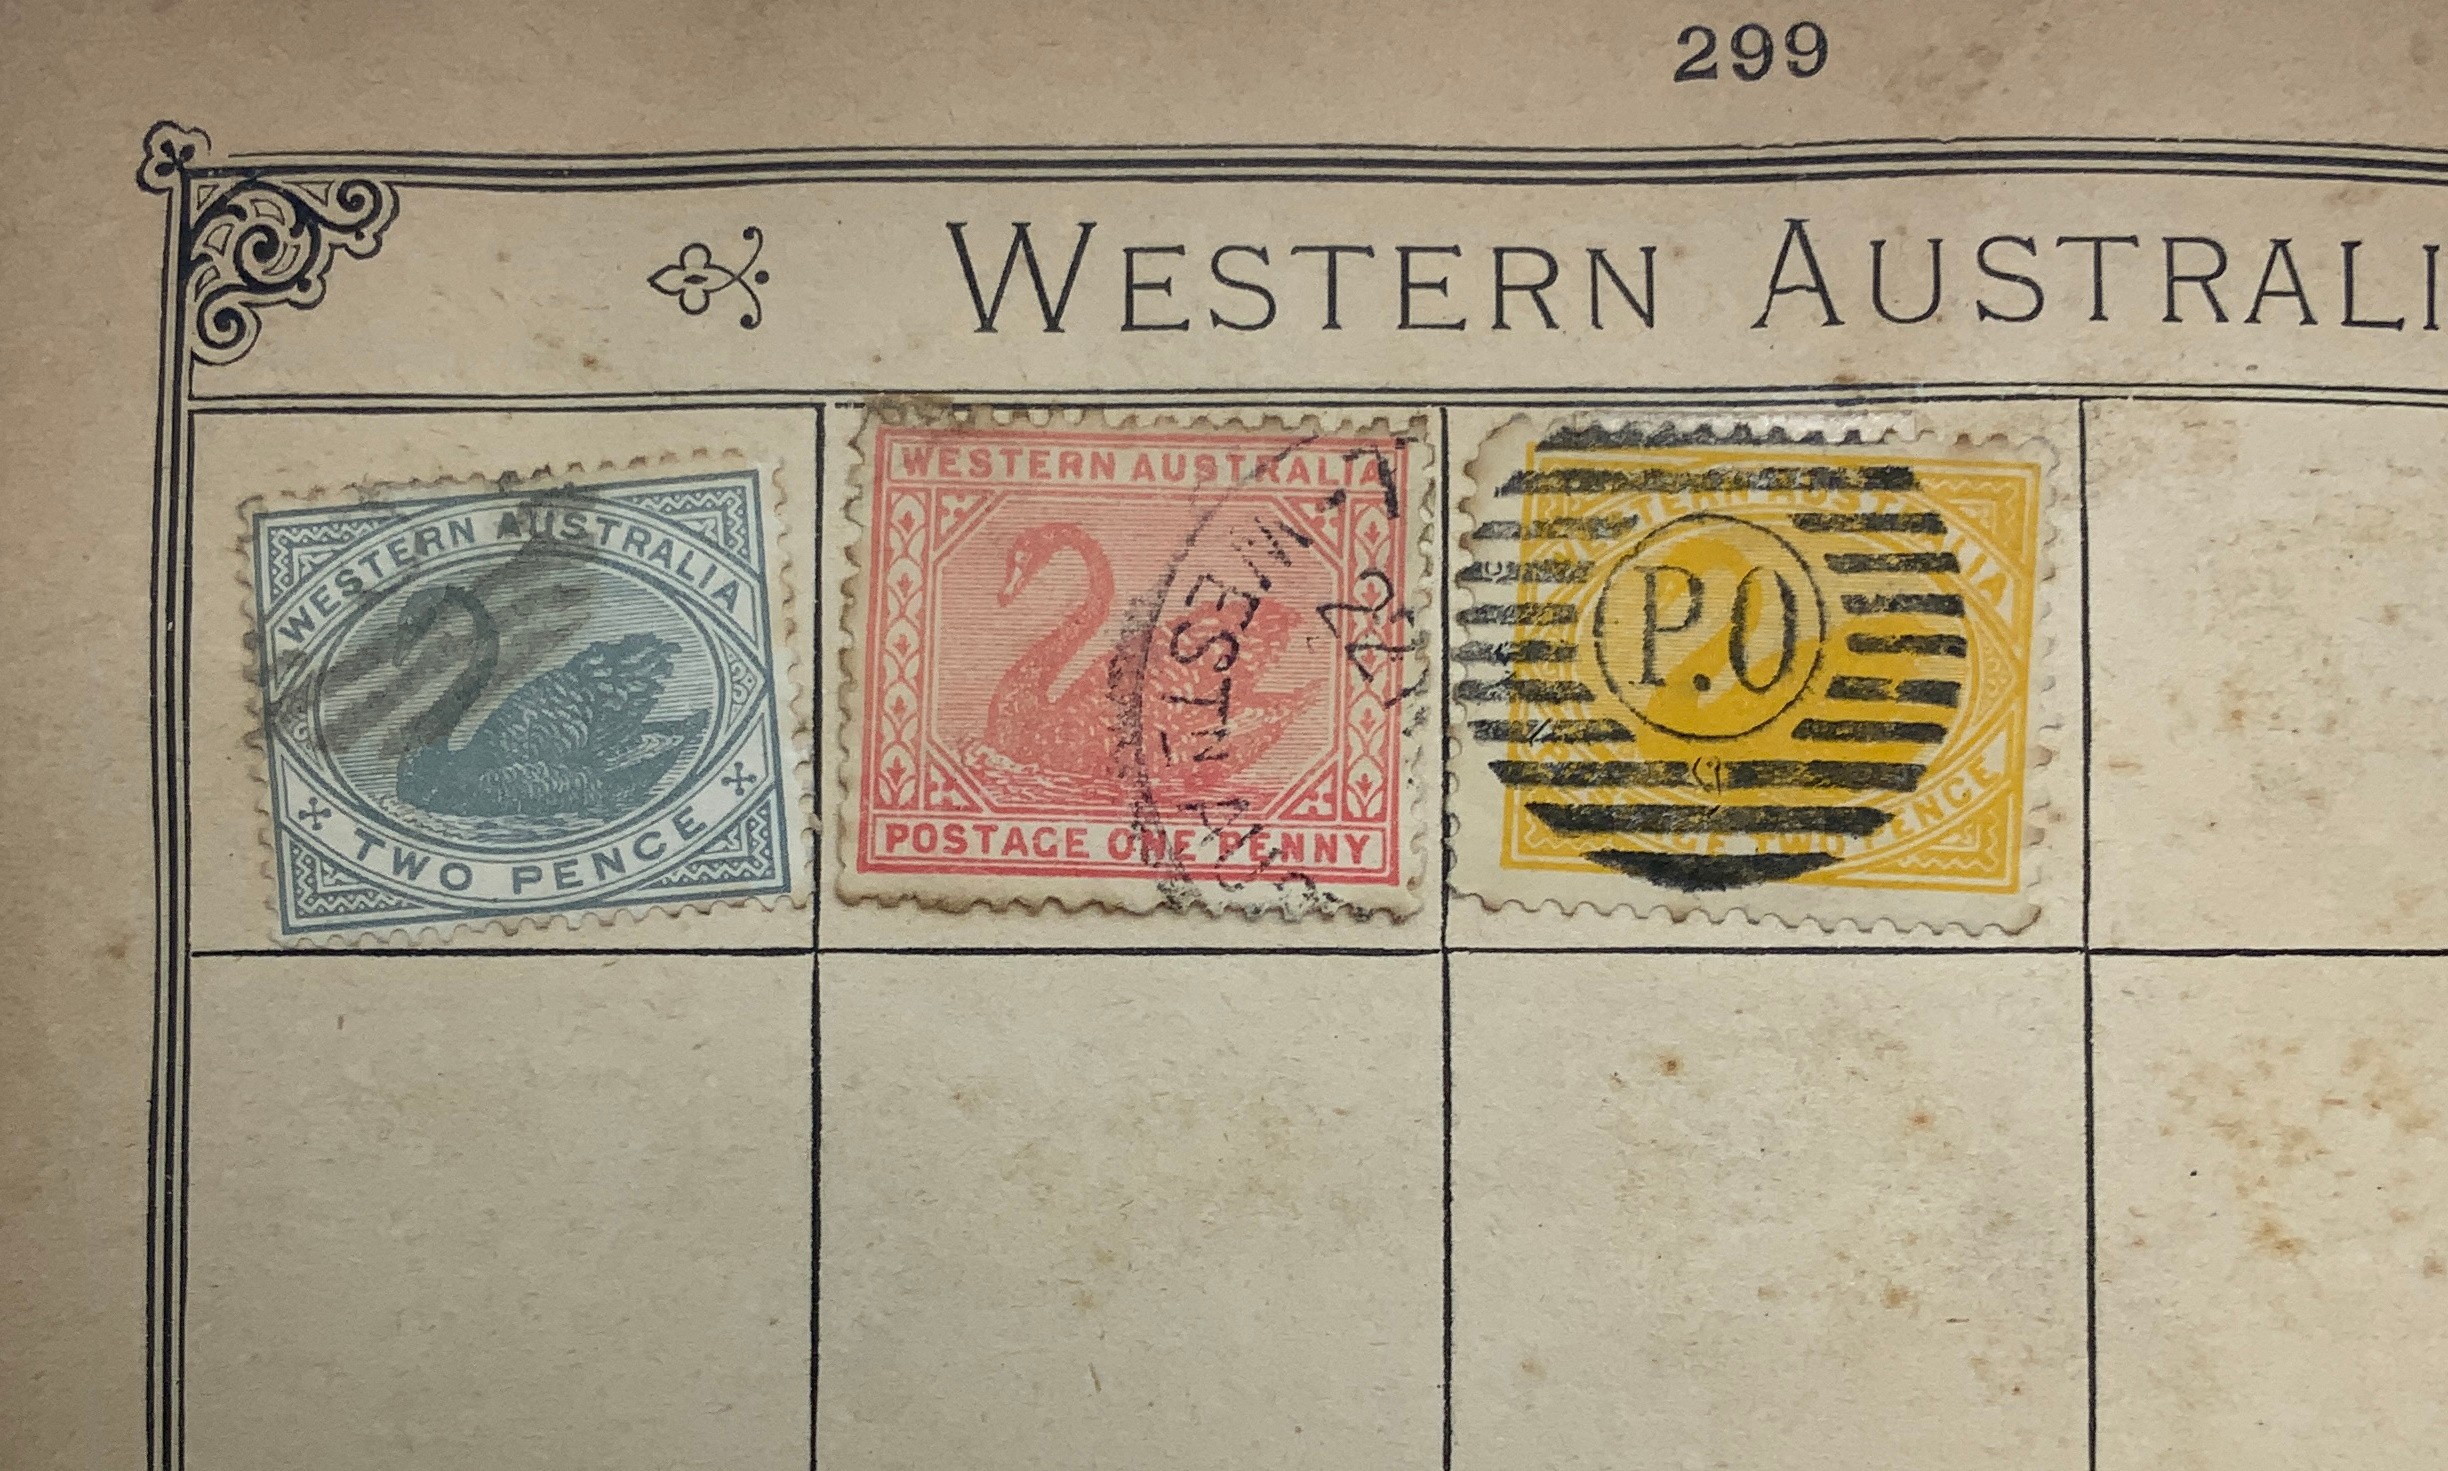 SELECTION OF VARIOUS STAMPS IN ALBUM, SOME LOOSE PAGES - Image 85 of 92